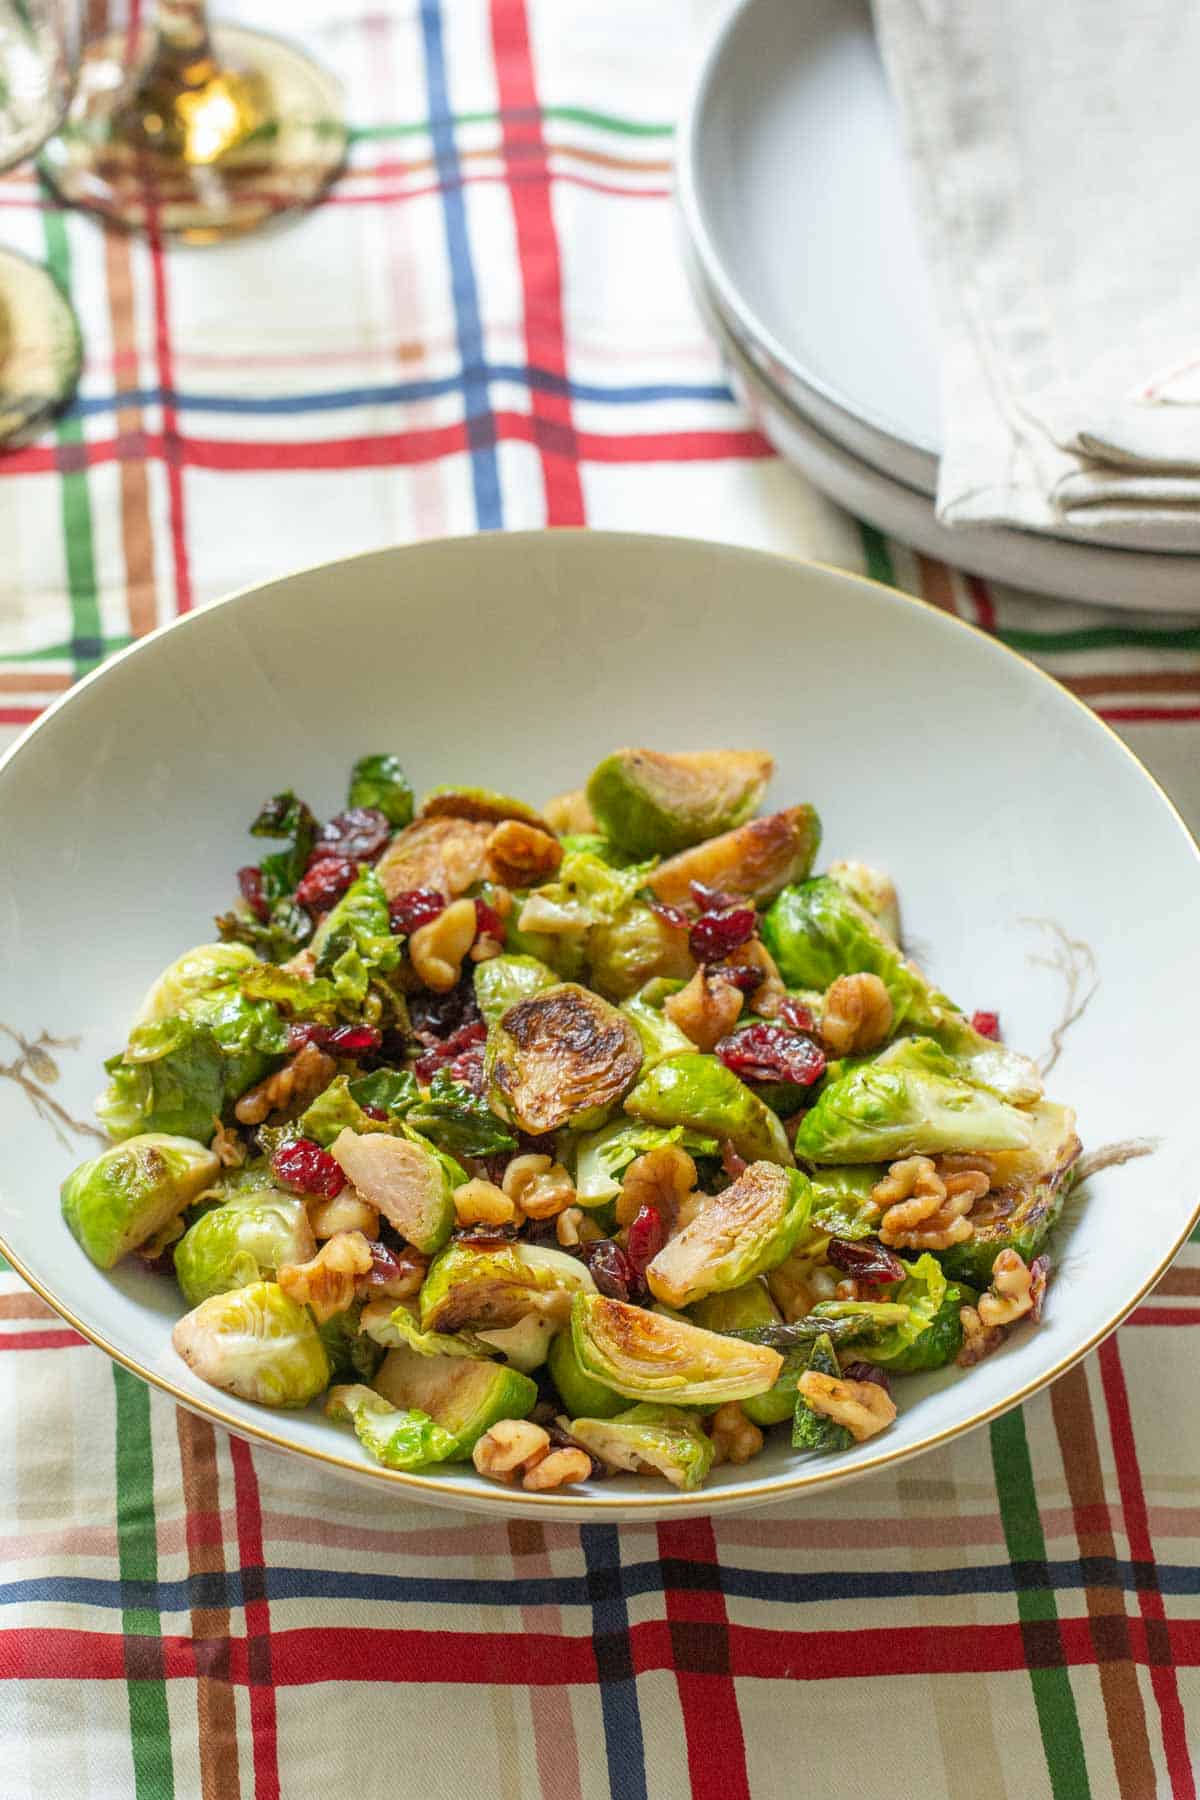 bowl of brussels sprouts with walnuts and cranberries on plaid tablecloth